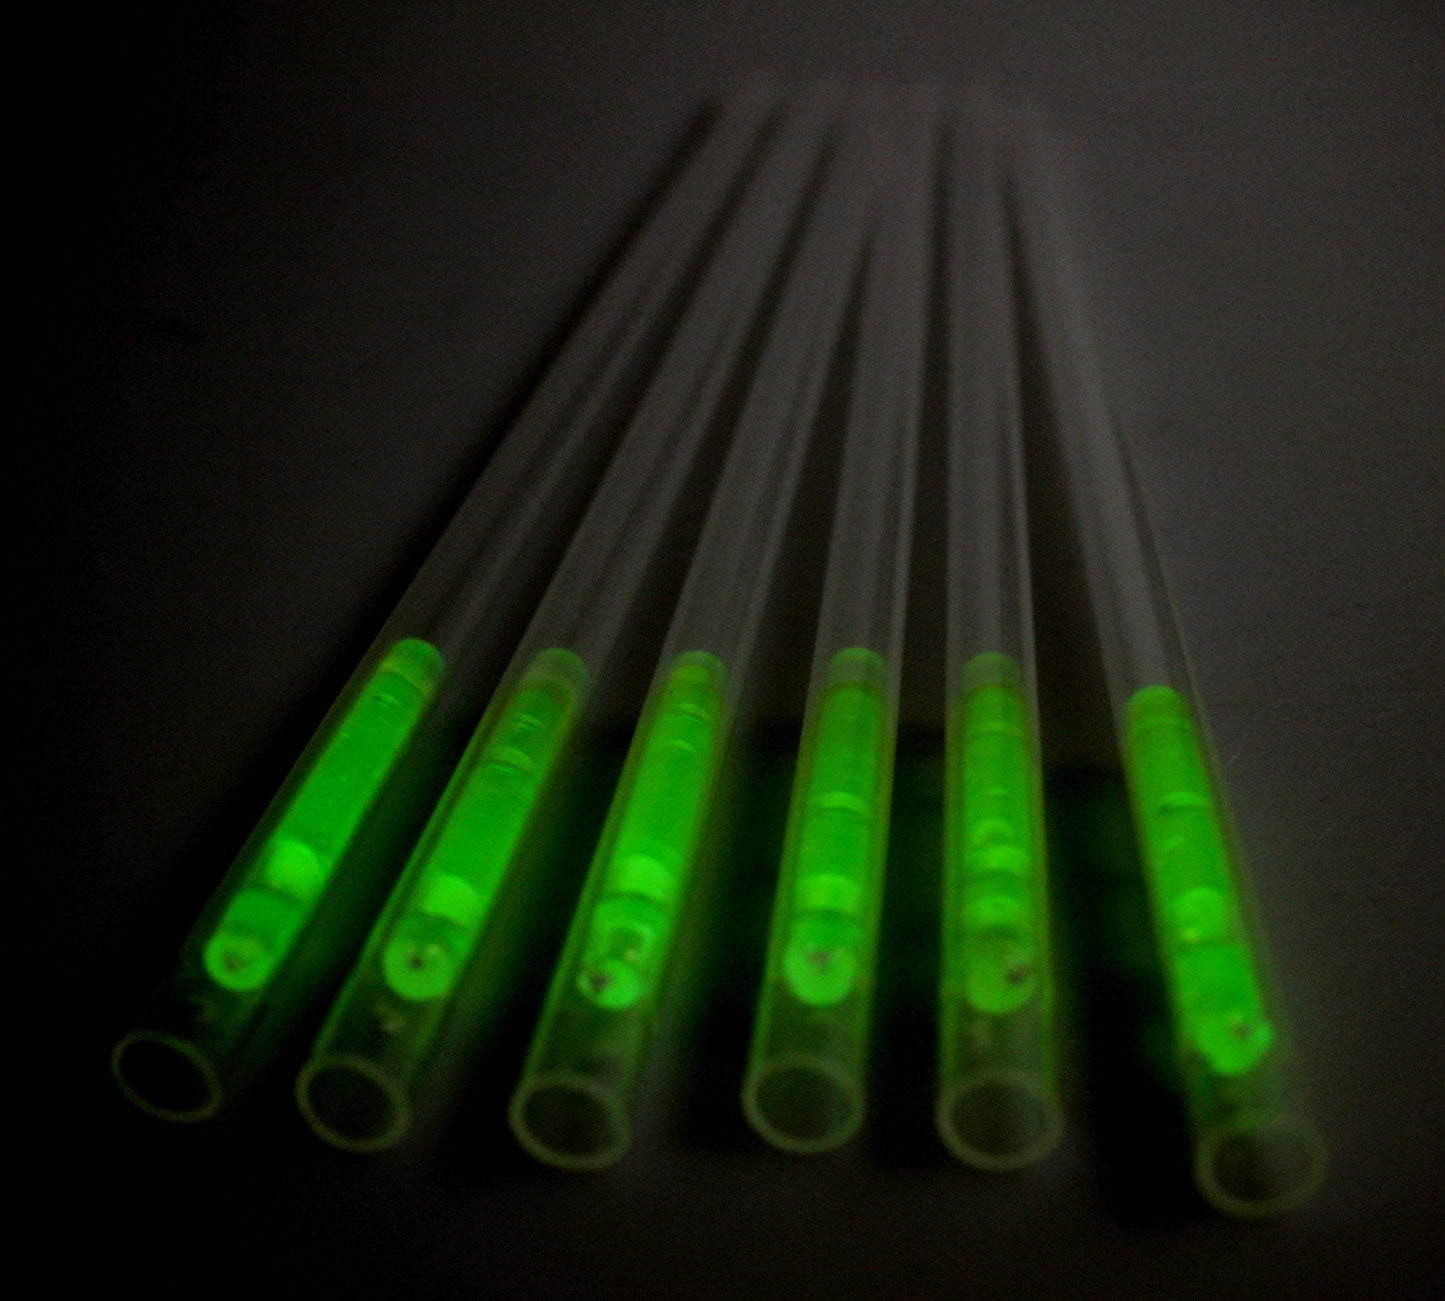 Glow In The Dark Plastic Straws Pack of 6 Assorted Colours 5257 (Parcel Rate)